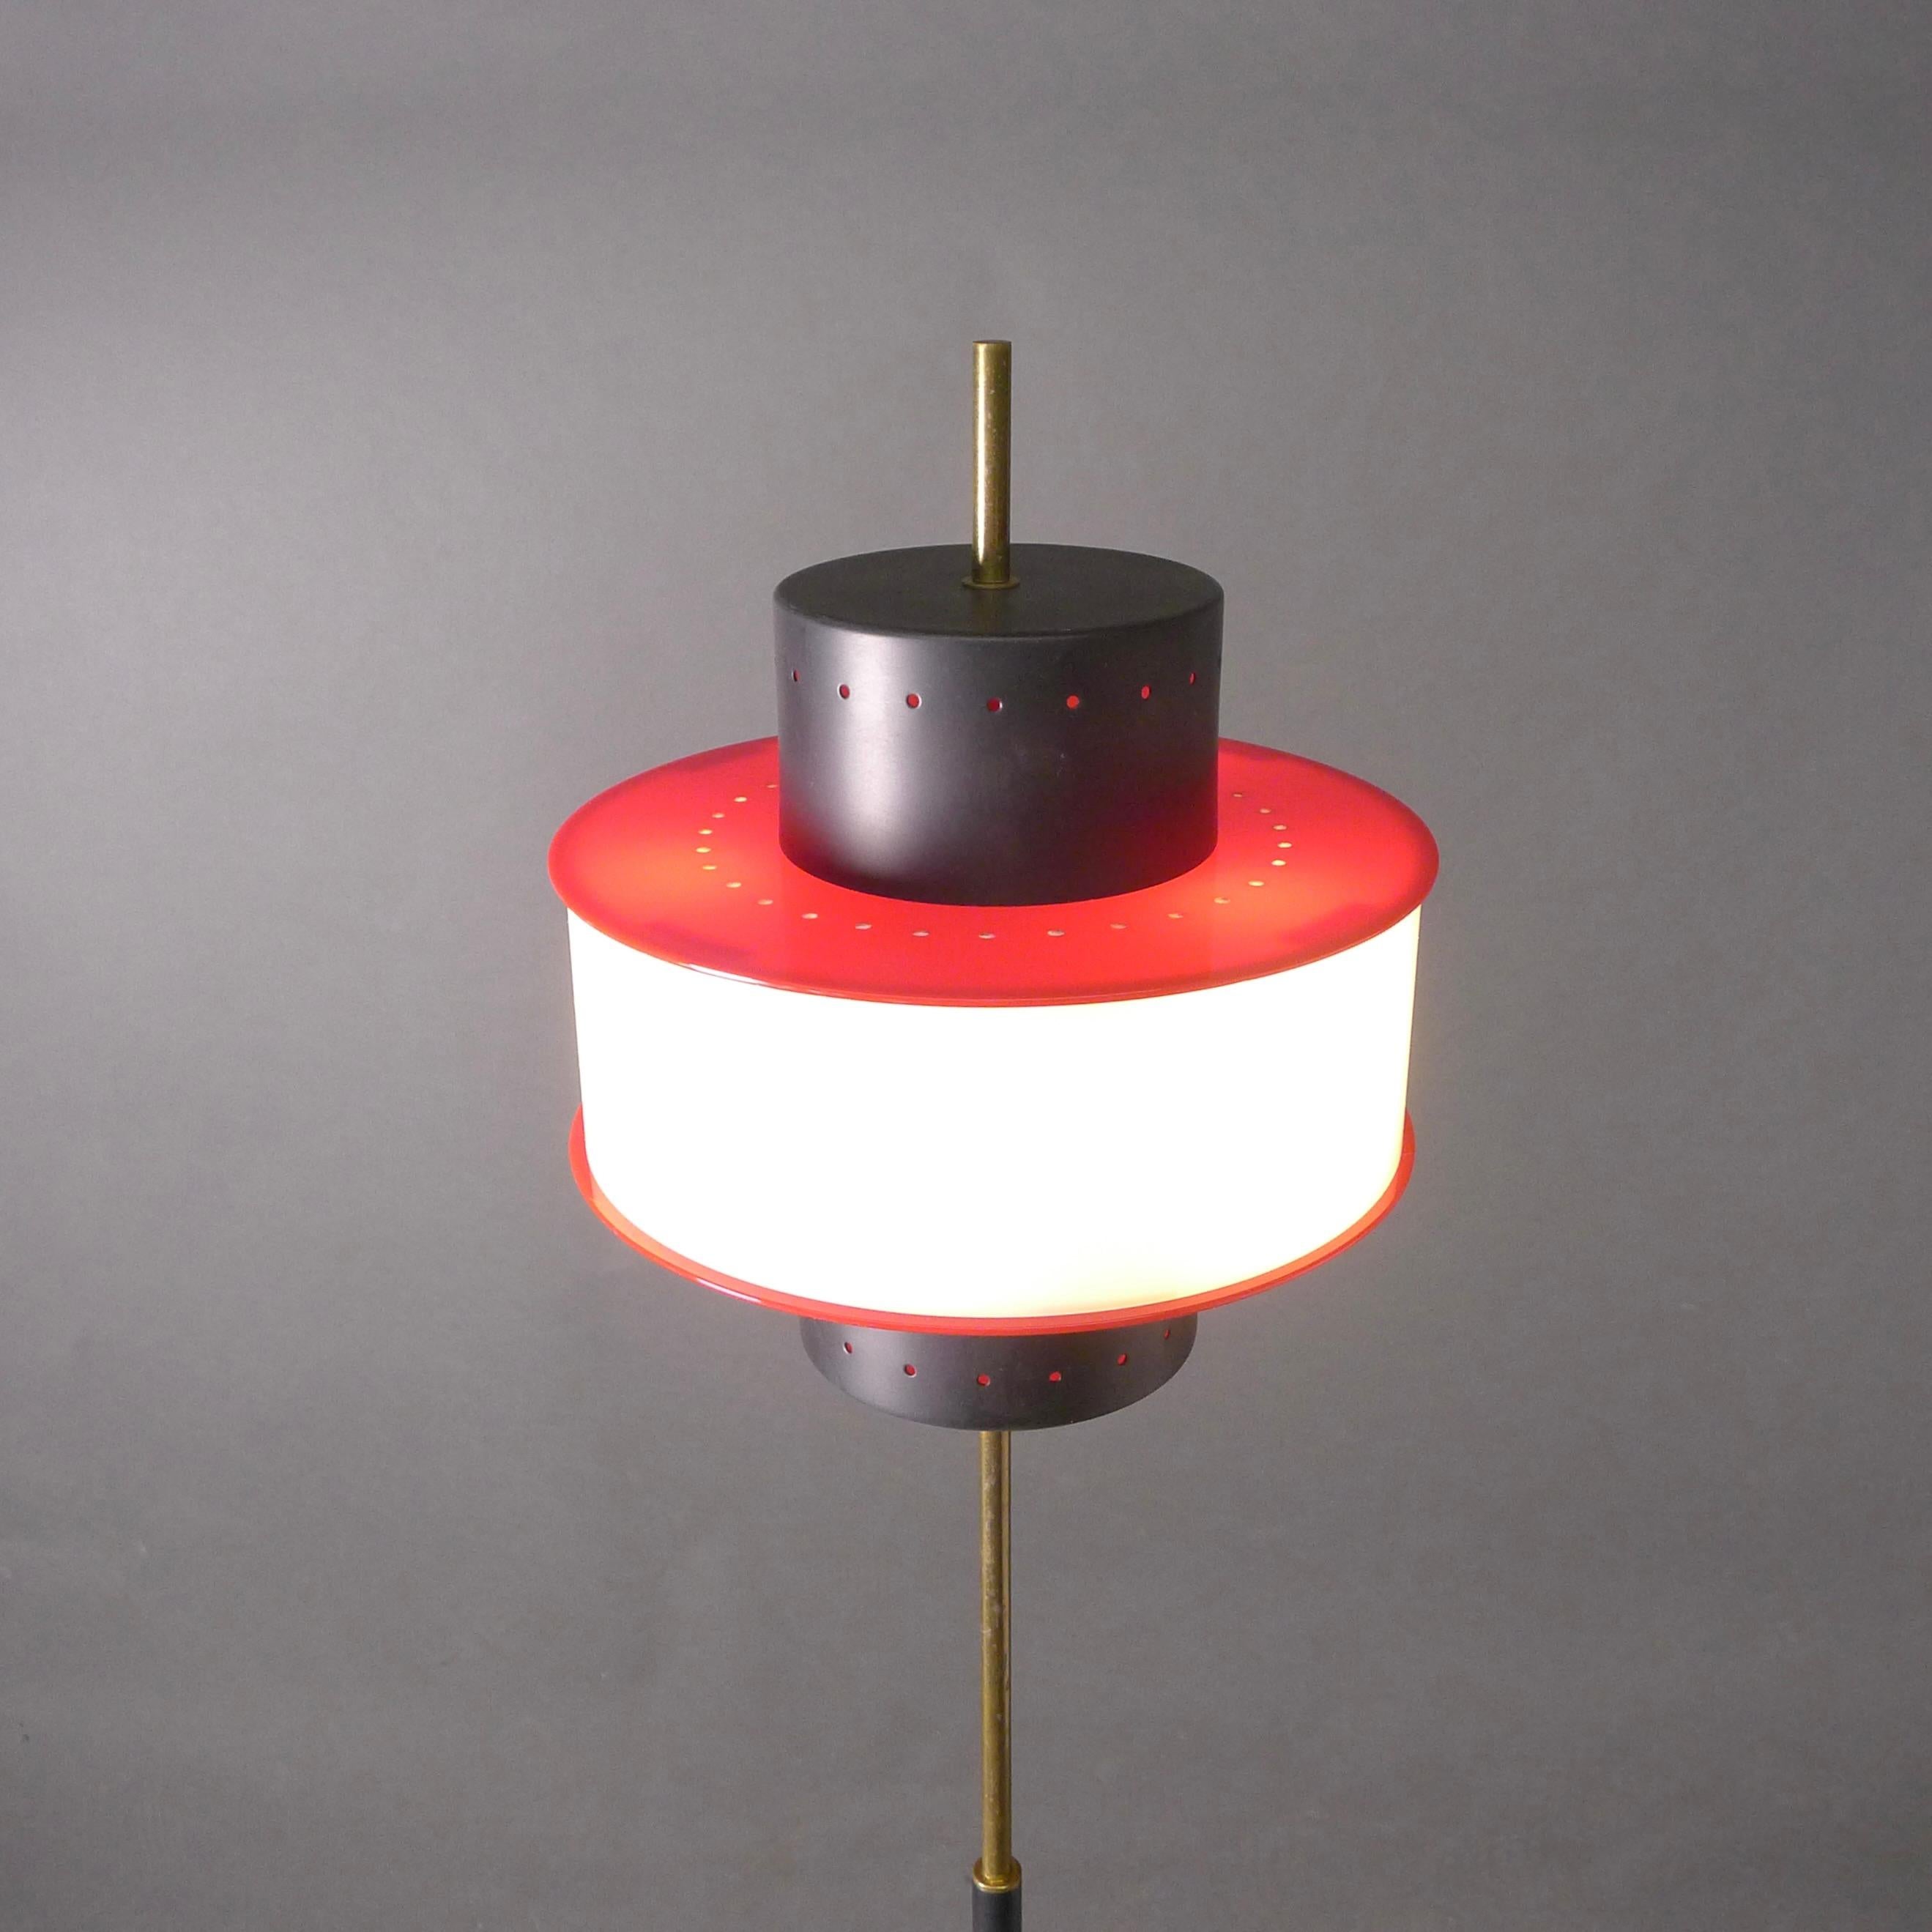 Stilnovo mid-century vintage floor lamp in black, white and red.

This elegant Stilnovo floor lamp comprises a black enamelled metal cylindrical shade surrounded by a white and red plexiglass diffuser, all with tiny perforations creating a soft